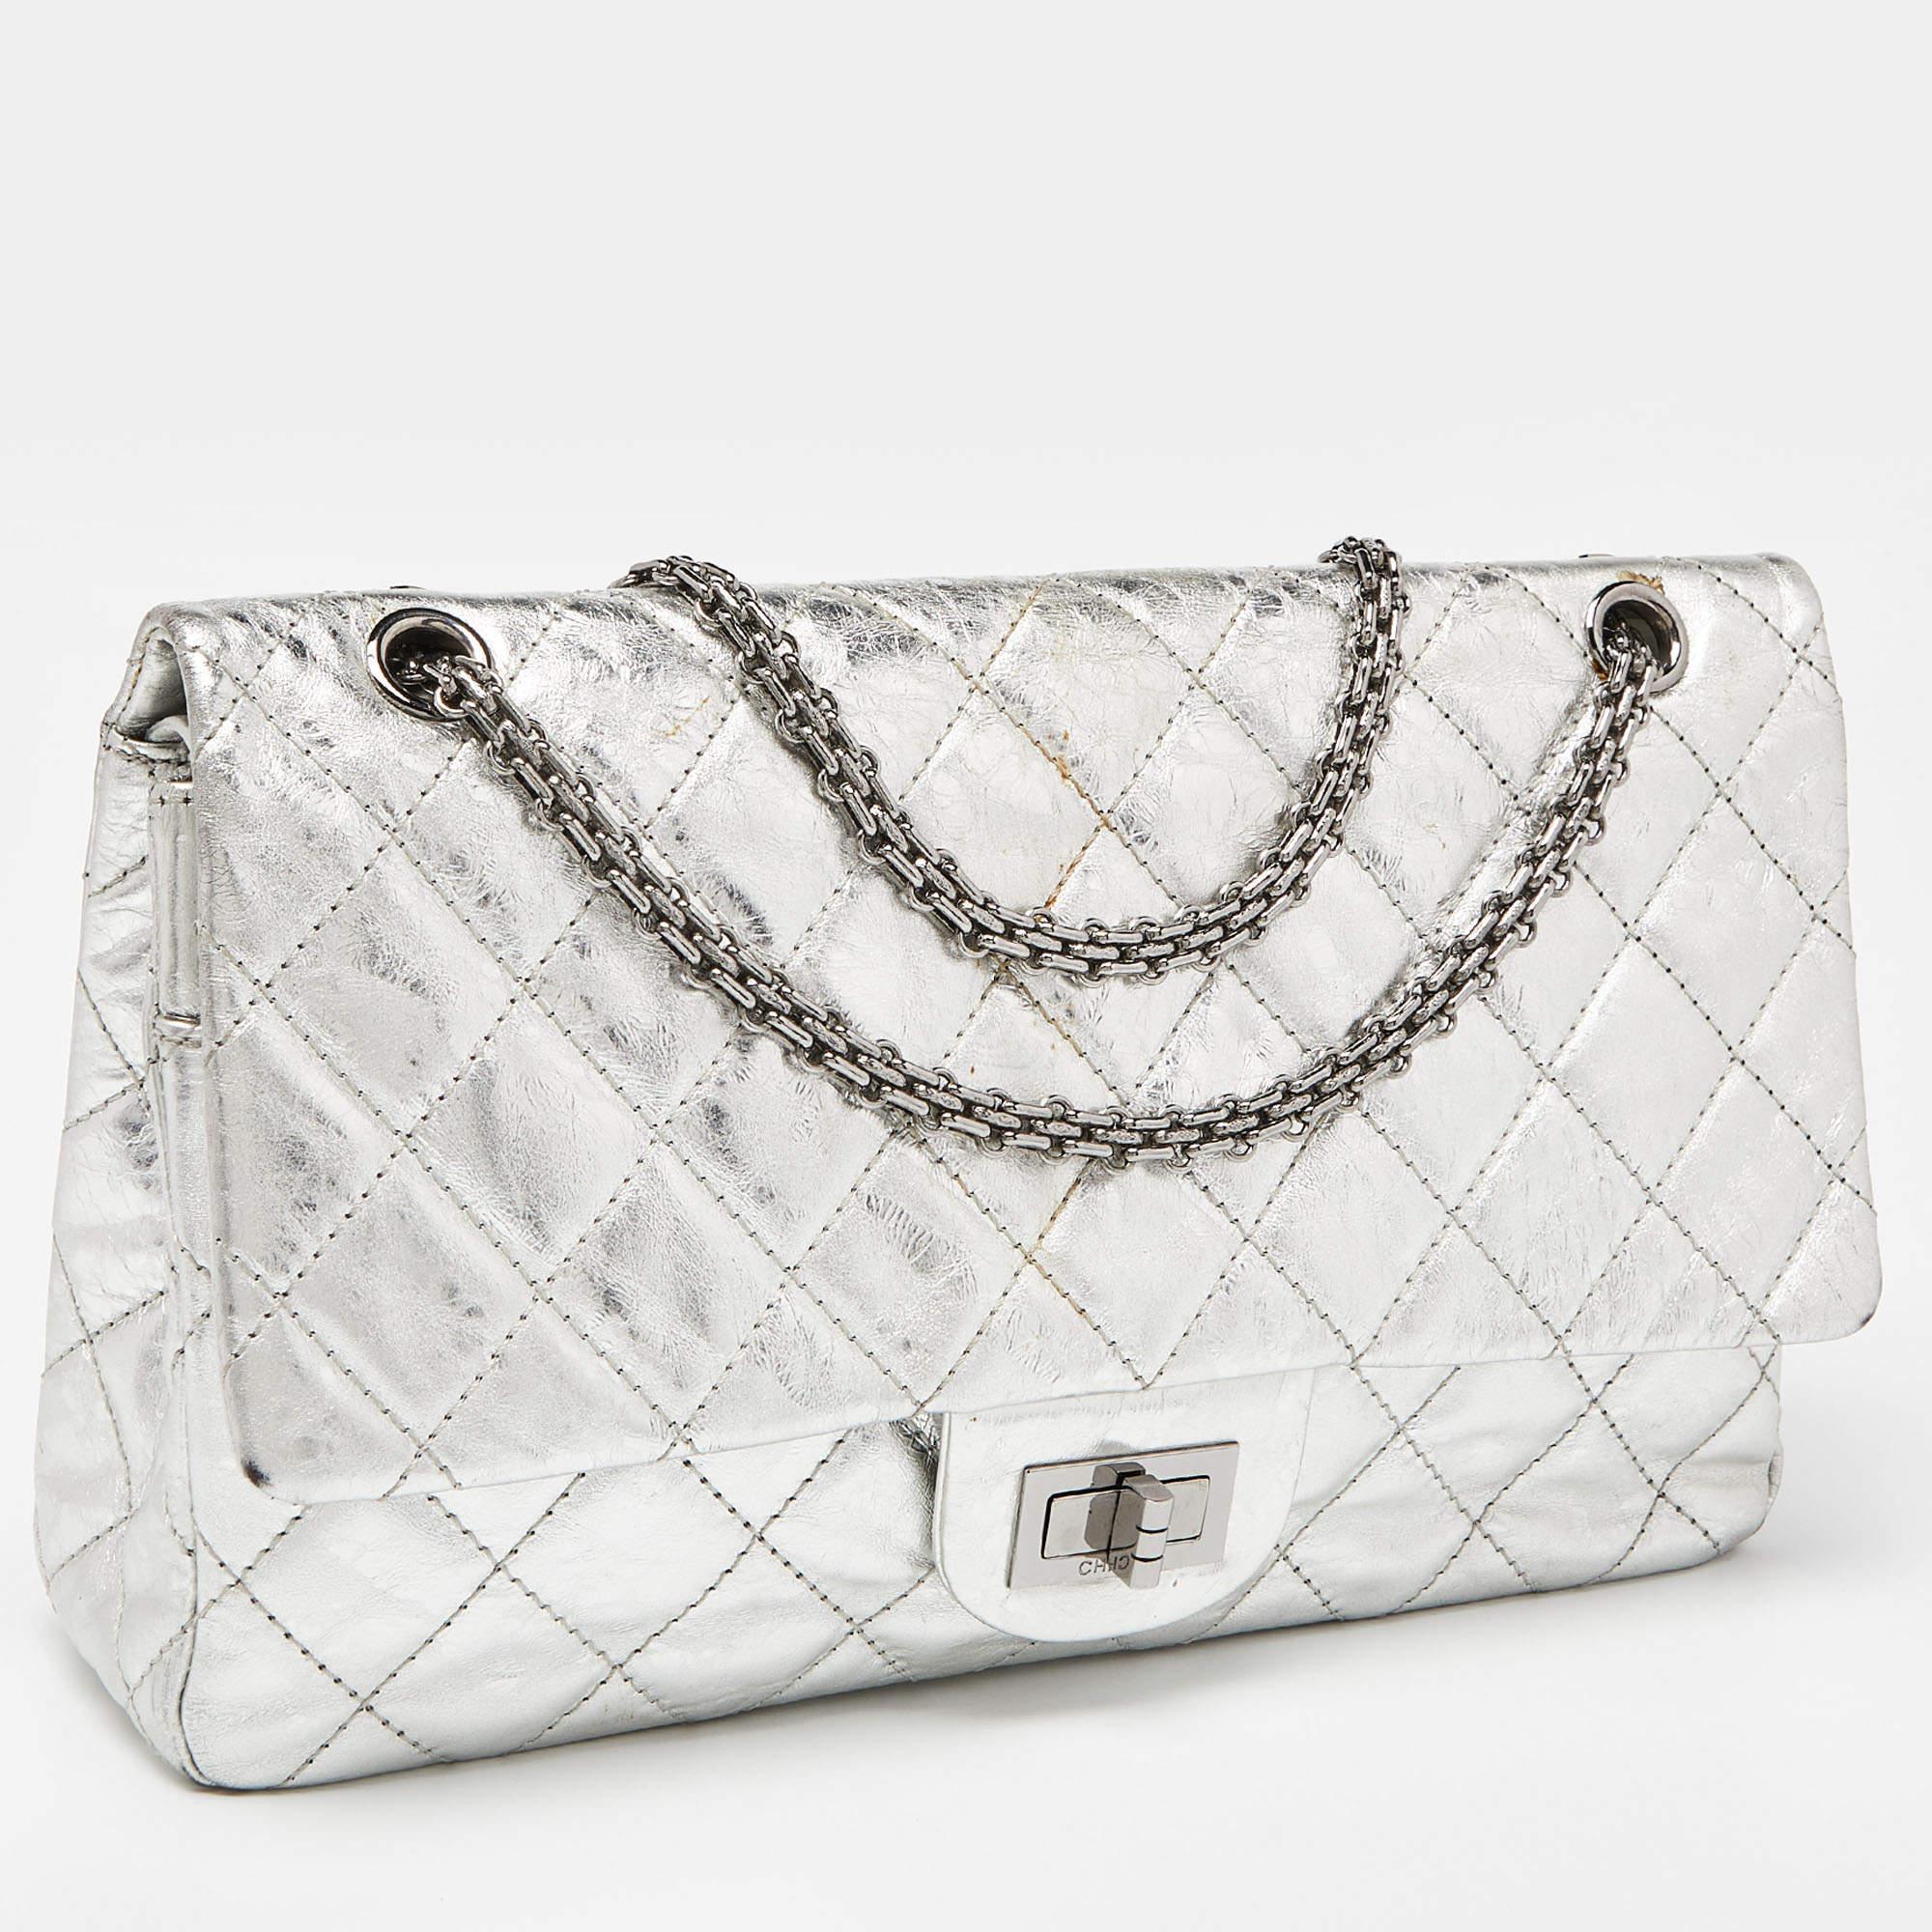 Chanel's Flap Bags are iconic and noteworthy in the history of fashion. We hence believe this Reissue 2.55 to be a wise purchase. Exquisitely crafted from crinkled leather, it bears their signature quilt pattern and the Mademoiselle lock on the